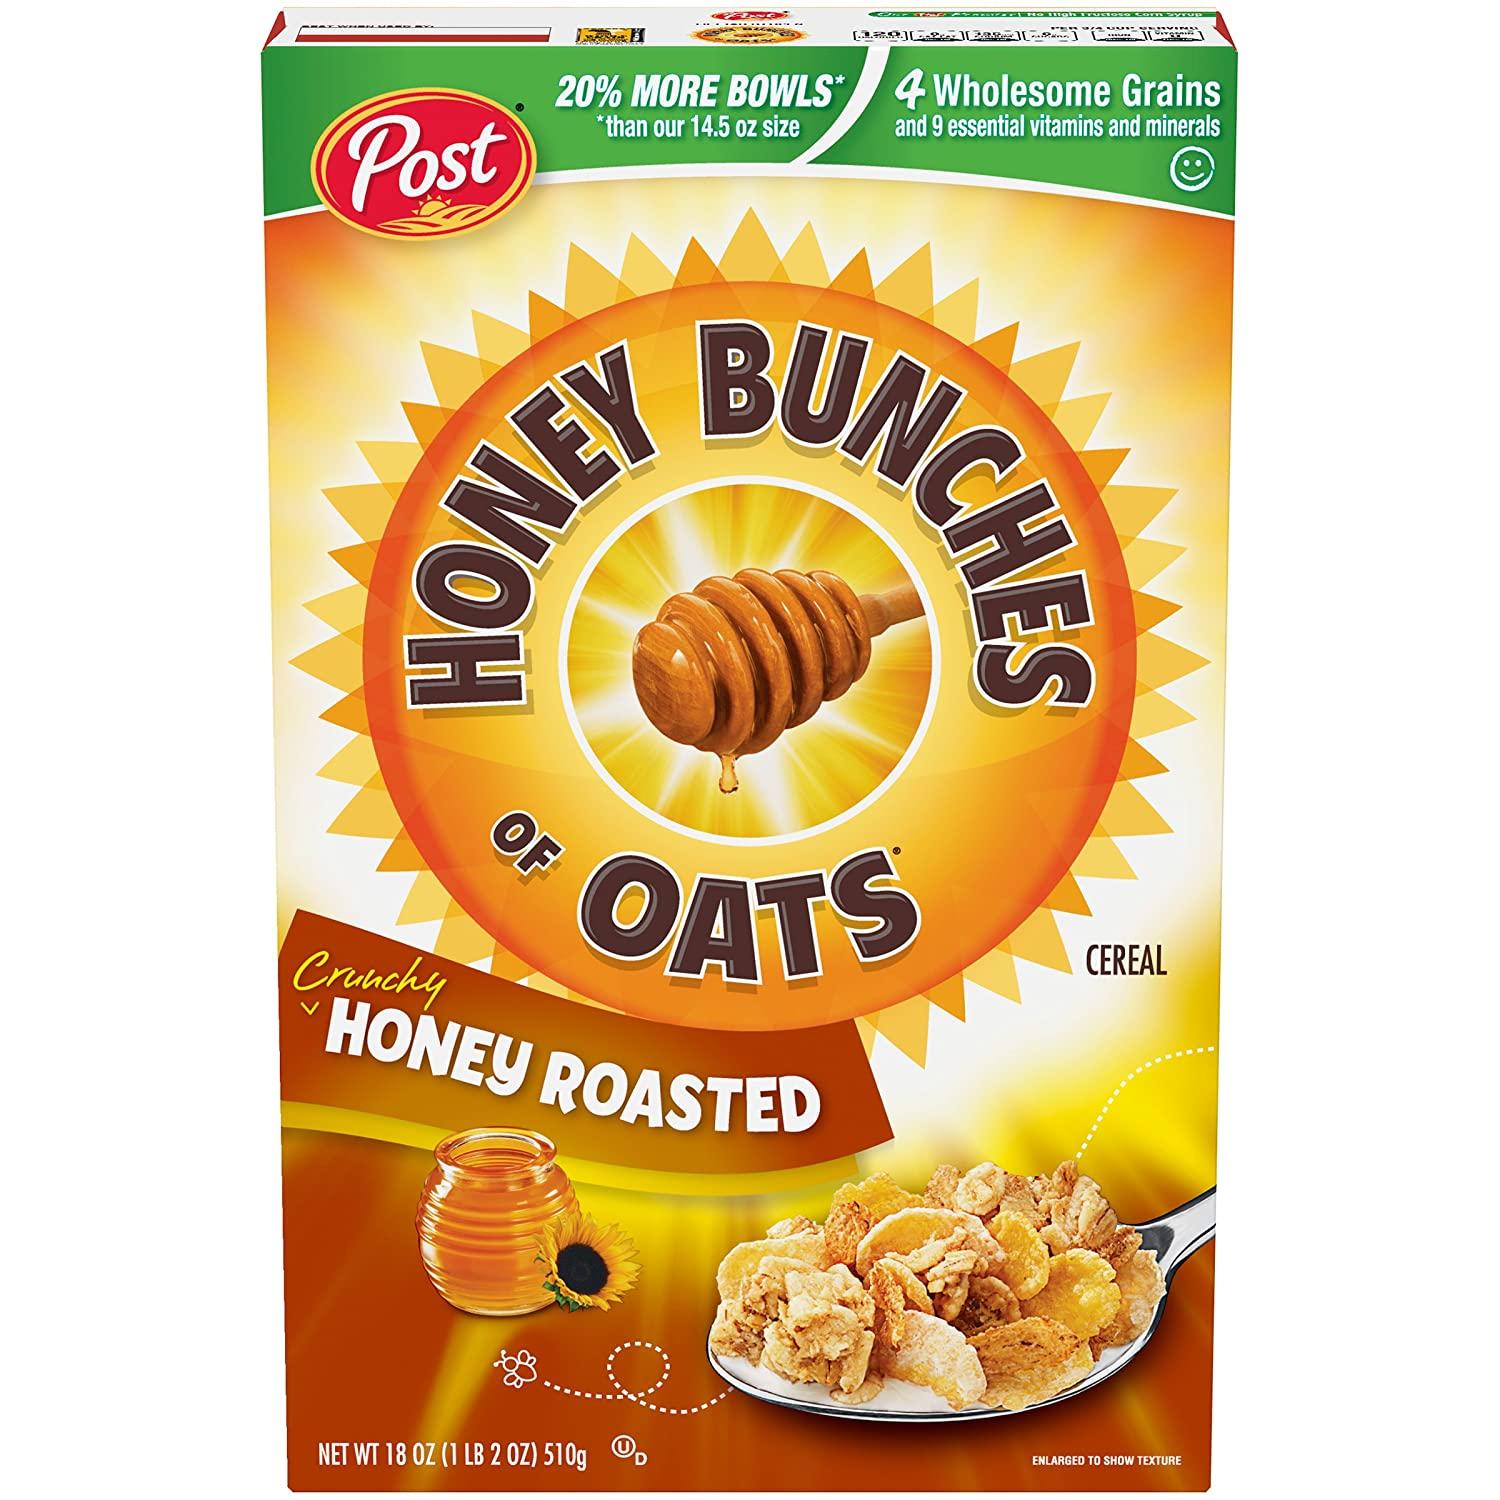 Post Honey Bunches of Oats Crunchy Honey Roasted Cereal Box for $2.82 Shipped